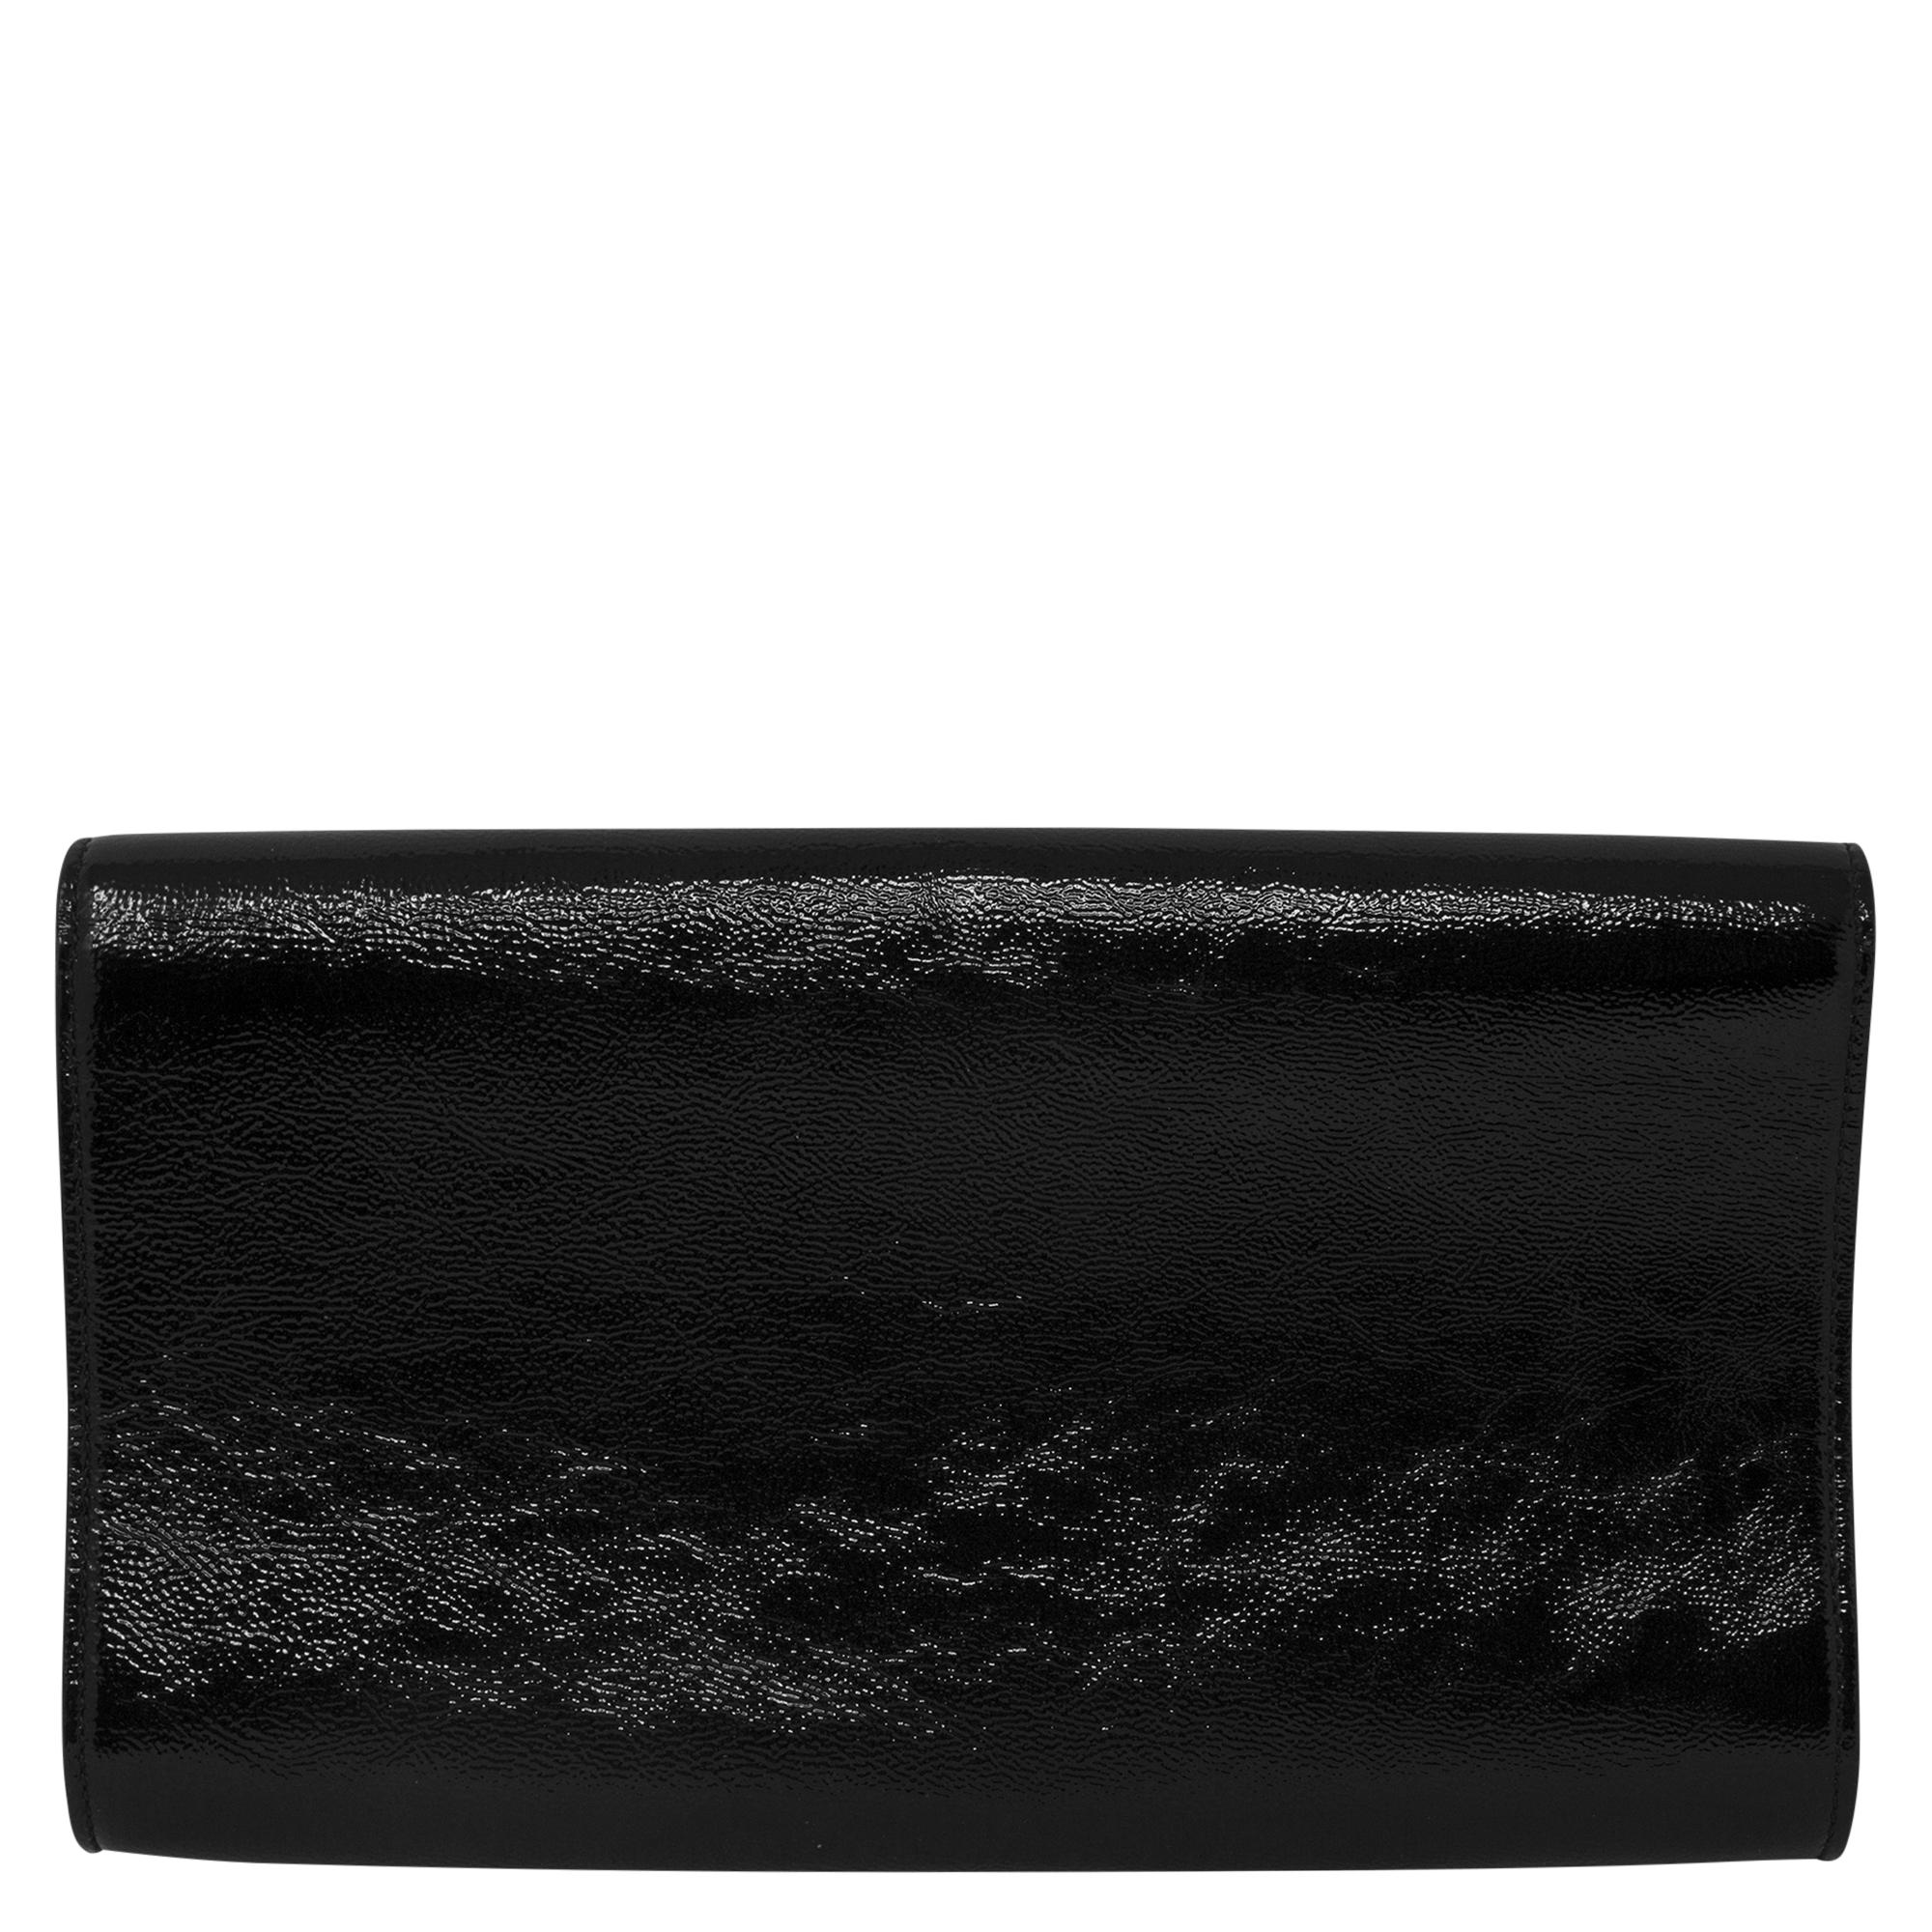 Yves Saint Laurent Black Patent Clutch In Excellent Condition For Sale In Atlanta, GA